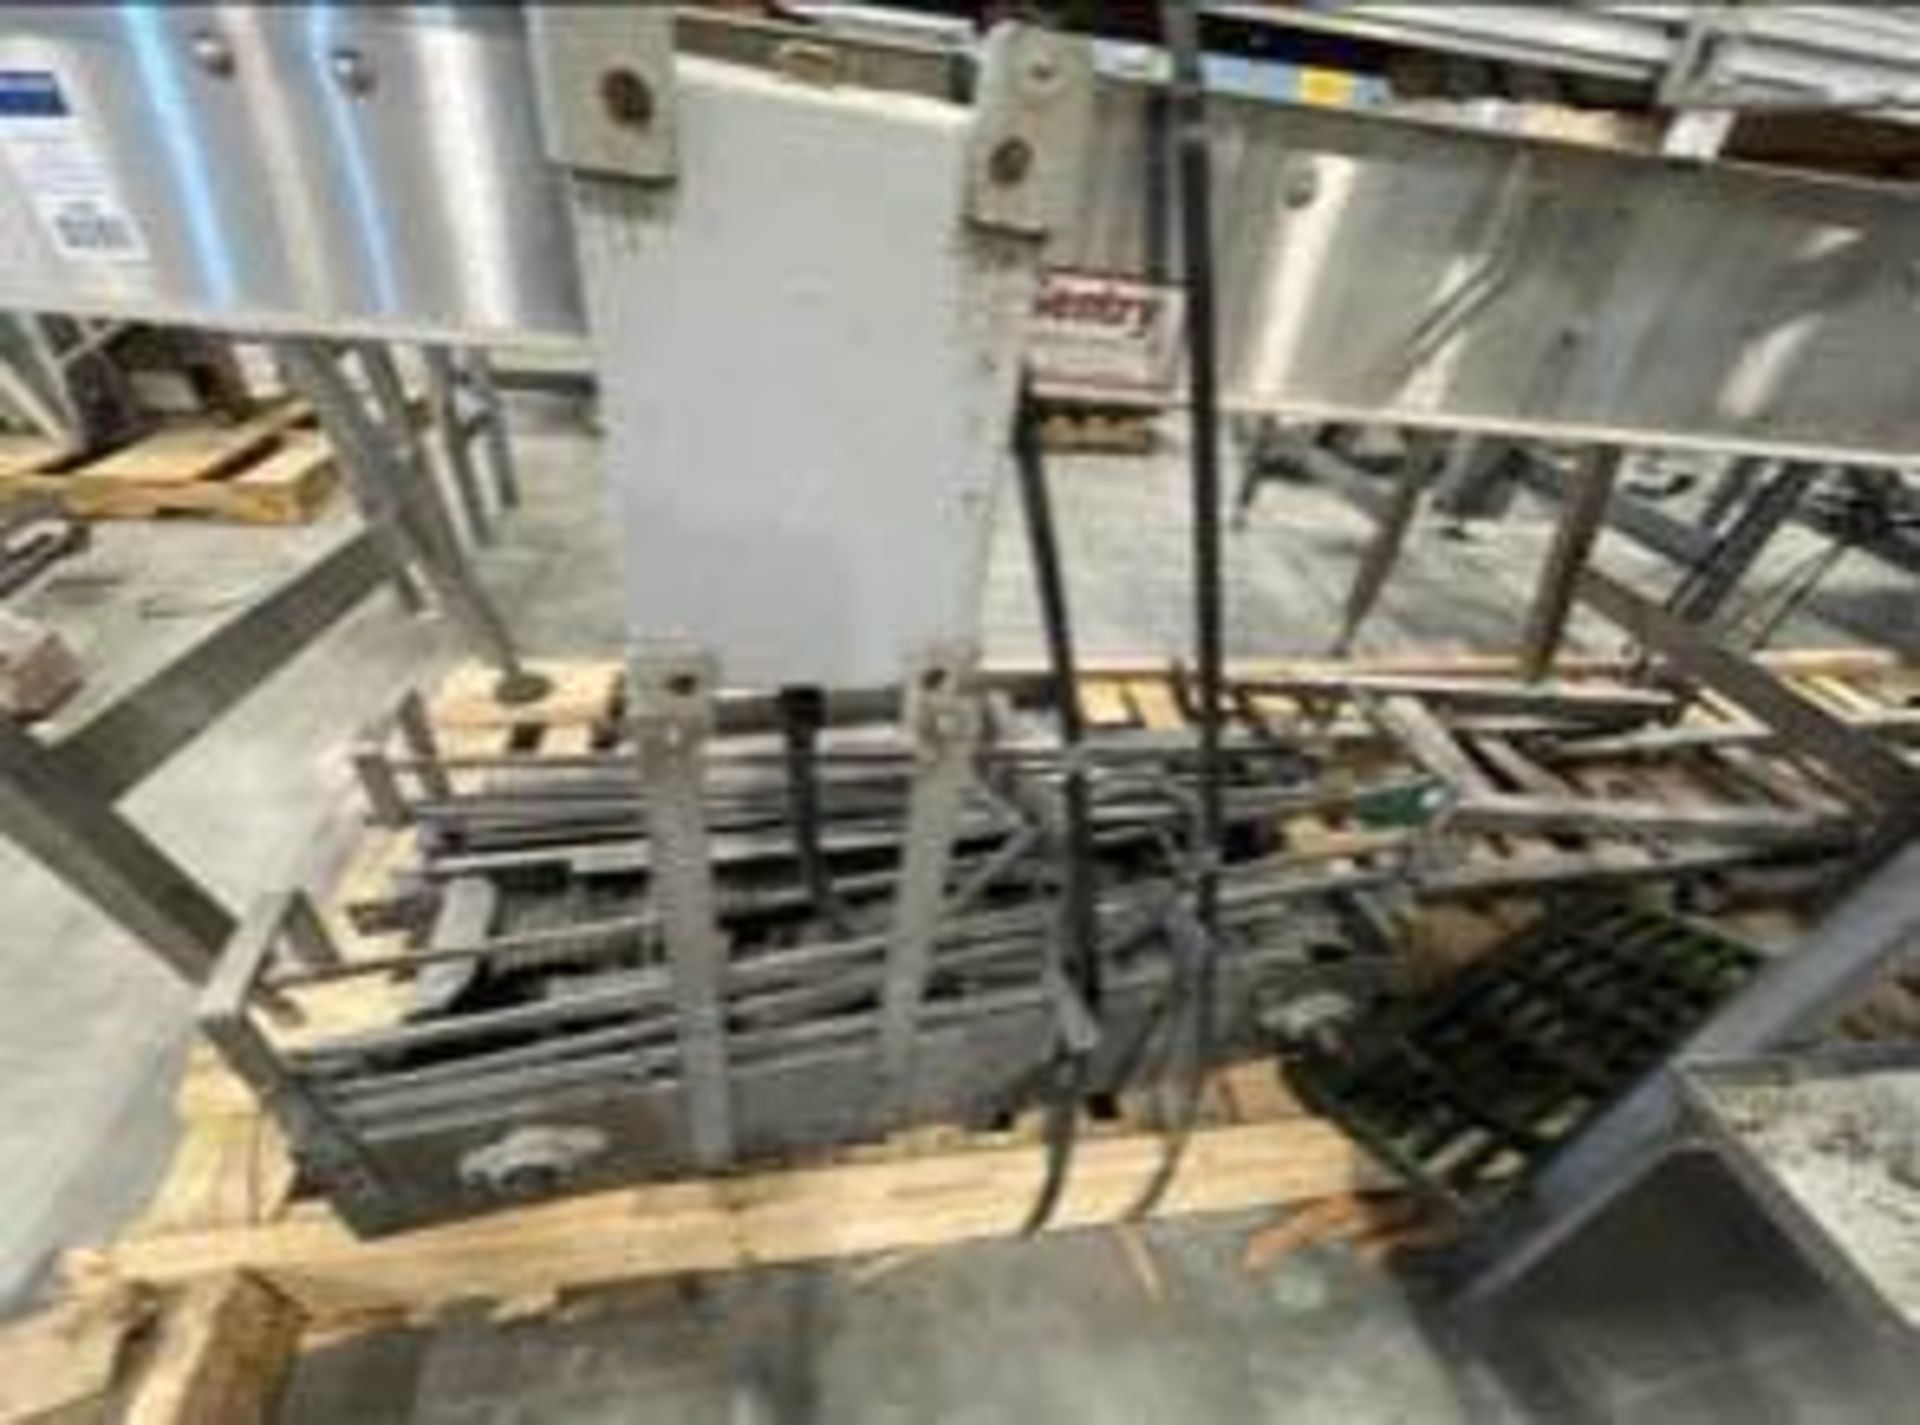 Skid of Sentry Full Can Conveyor - Located At Pembroke Pines, FL Facility - Image 2 of 2